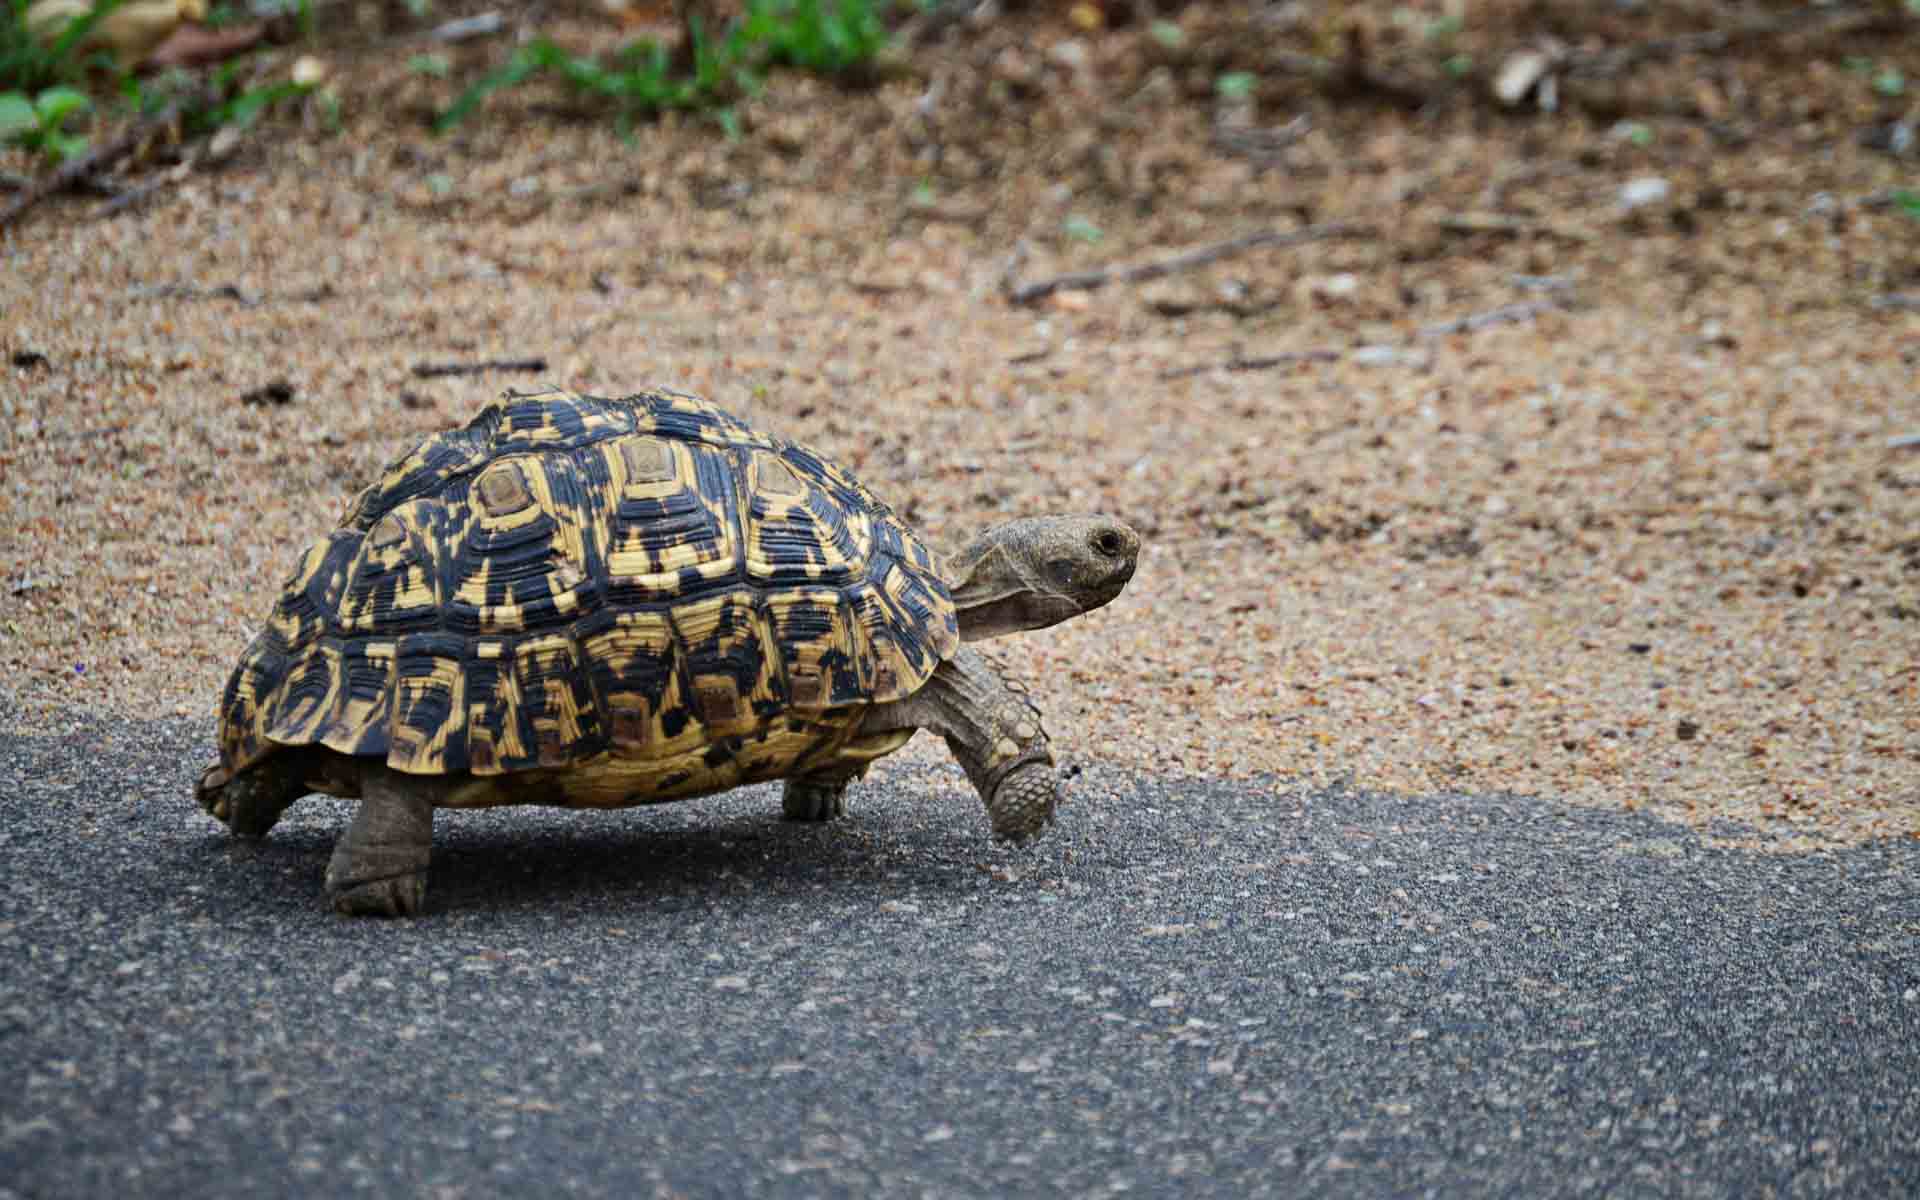 A leopard tortoise walking along a road - one of Africa’s animals and part of the Small Five of Africa.